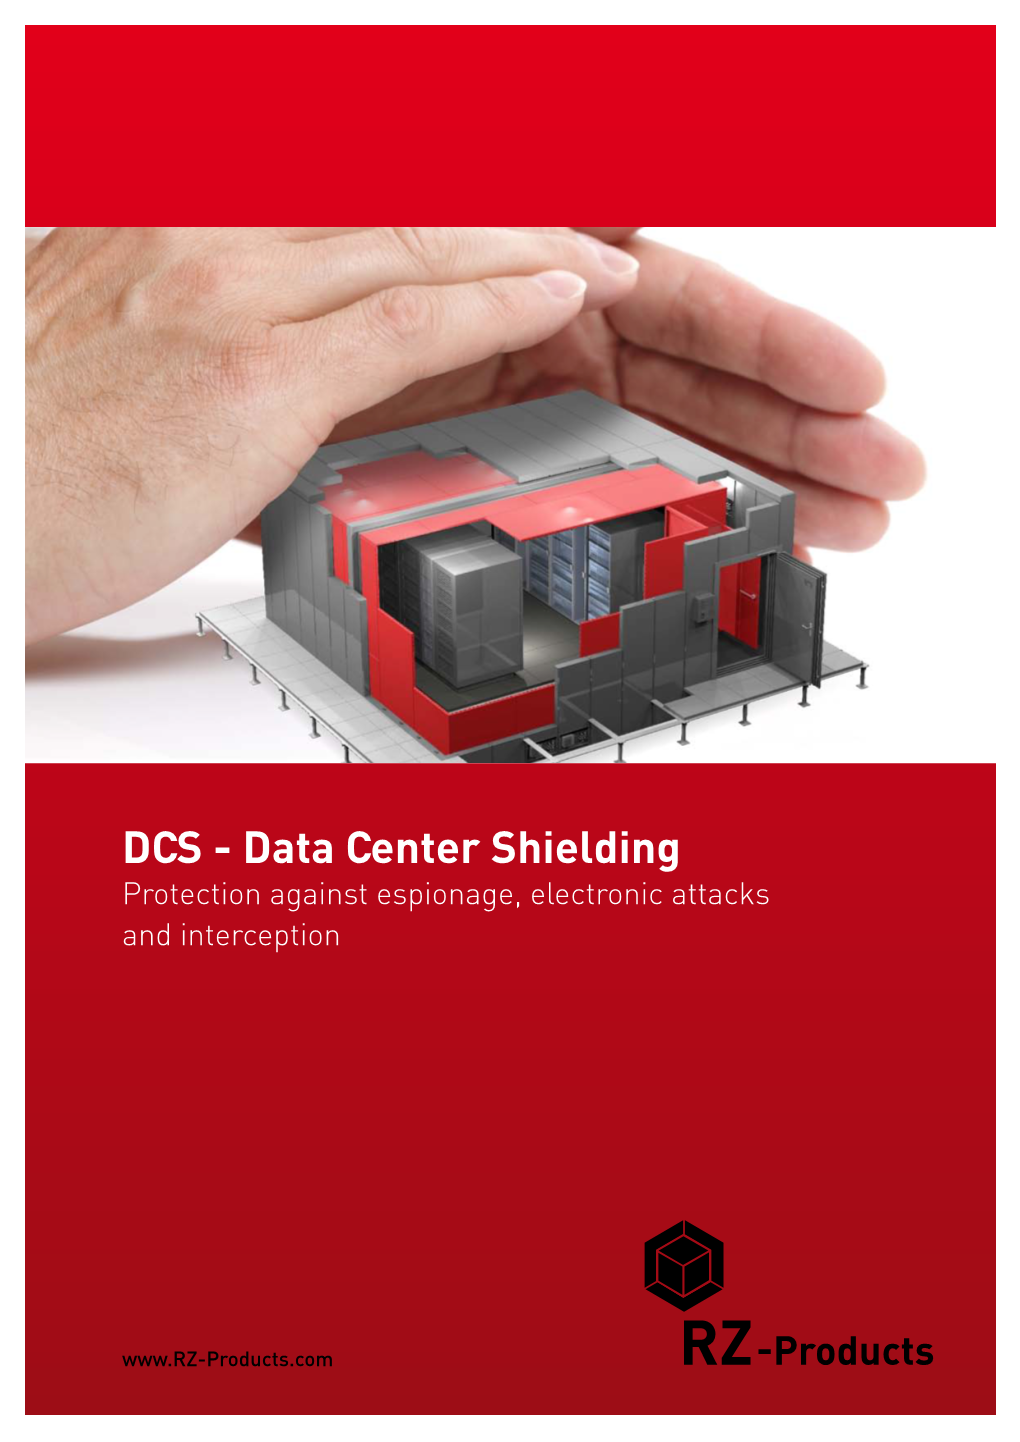 Data Center Shielding Protection Against Espionage, Electronic Attacks and Interception